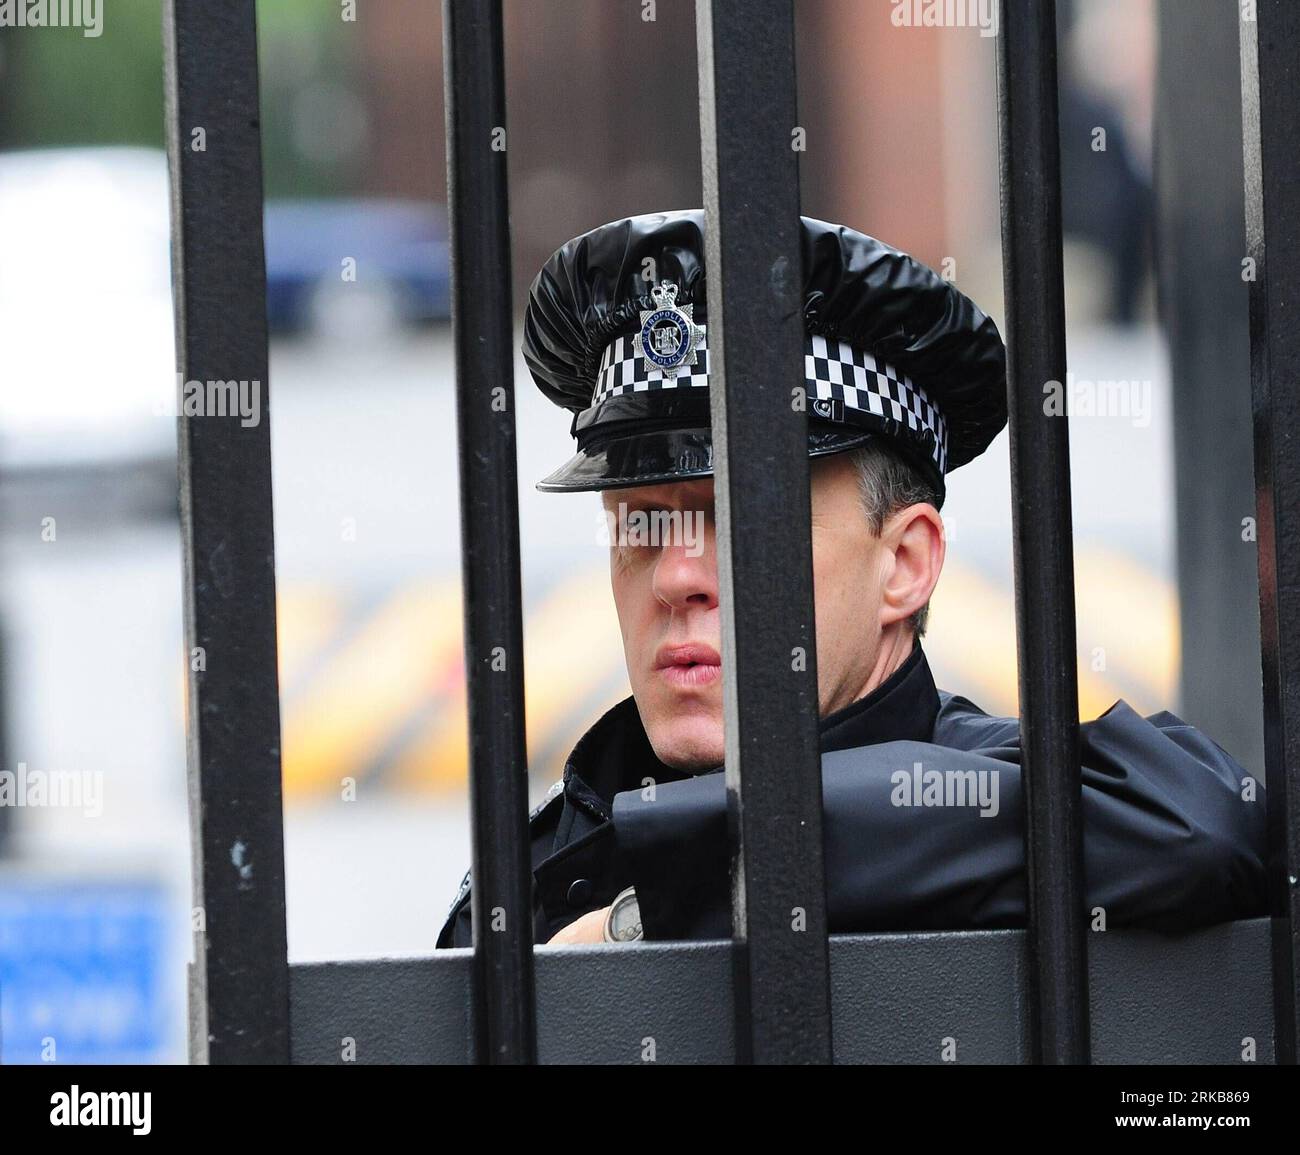 Bildnummer: 54509886  Datum: 04.10.2010  Copyright: imago/Xinhua (101004) -- LONDON, Oct. 4, 2010 (Xinhua) -- A policemen stands guard at the entrance to Downing Street in London, Britain, Oct. 4, 2010. Britain s Foreign Office issued its latest warning on Sunday for its citizens travelling in France and Germany that there was a high threat of terrorism in the two European countries. (Xinhua/Zeng Yi) UK-TERRORISM-WARNING PUBLICATIONxNOTxINxCHN Politik Terrorismus Terrorwarnung Sicherheit kbdig xmk 2010 quadrat premiumd     Bildnummer 54509886 Date 04 10 2010 Copyright Imago XINHUA  London OCT Stock Photo